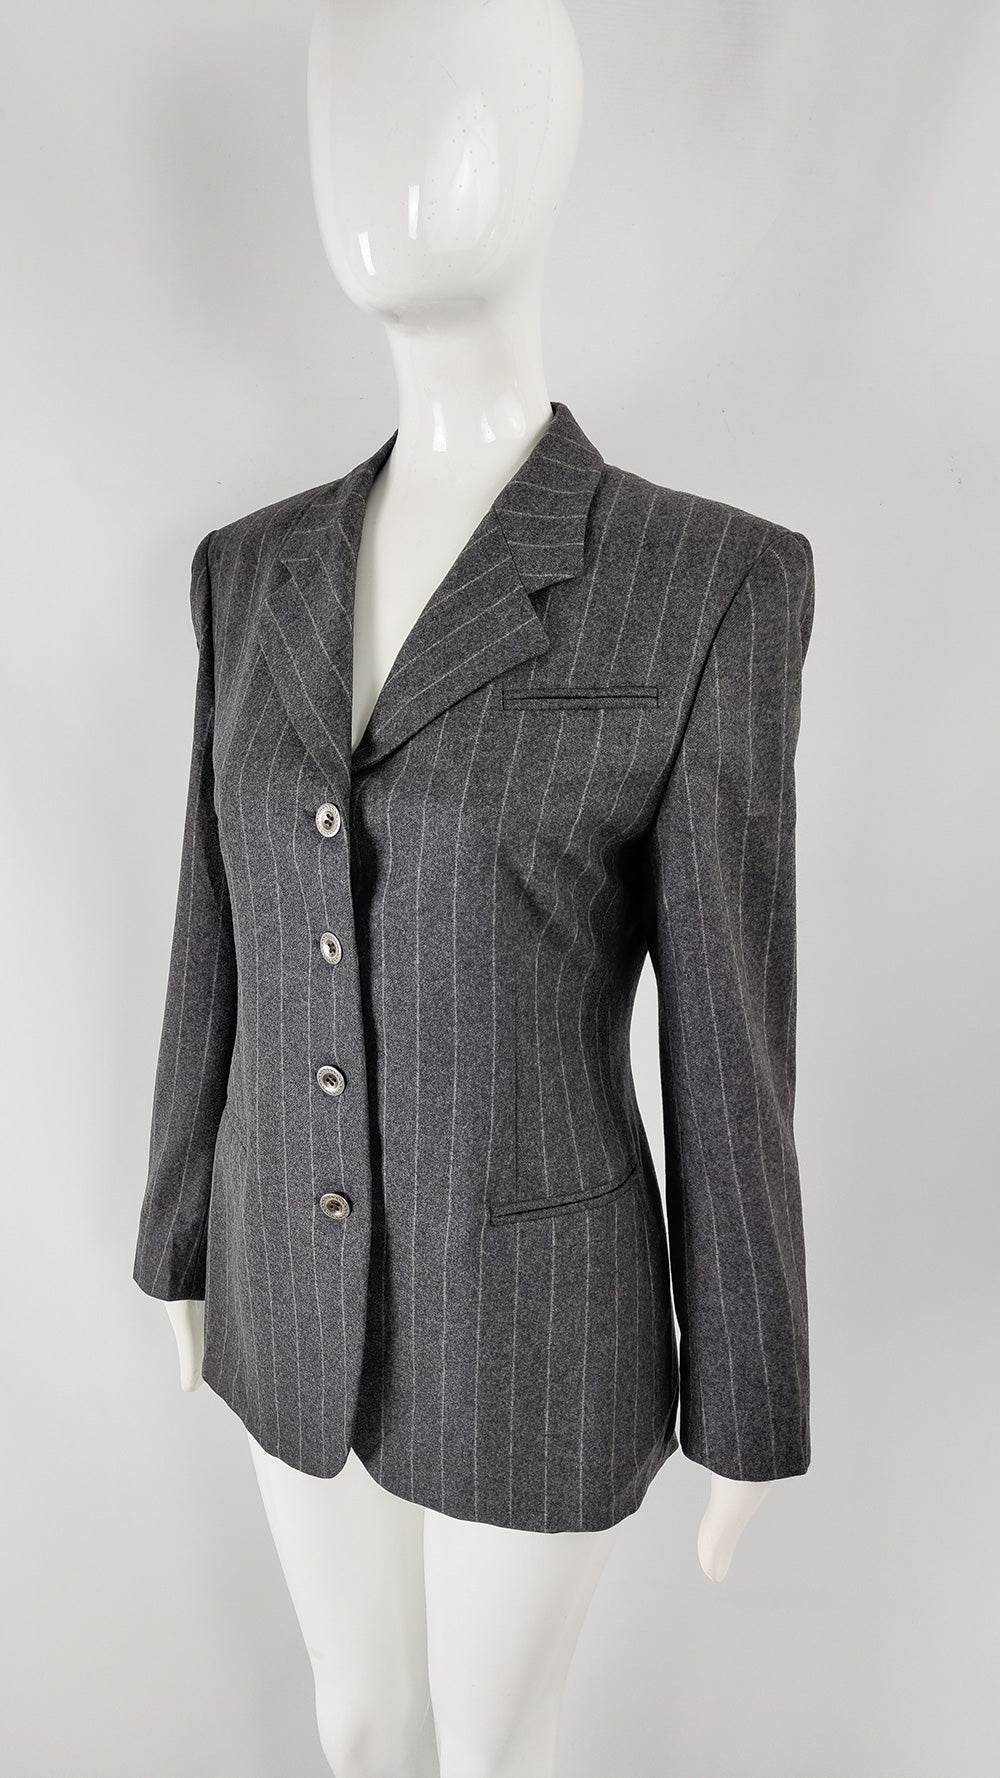 An image of a grey pinstripe wool blazer with 4 buttons down the front by Claudio Lugli.